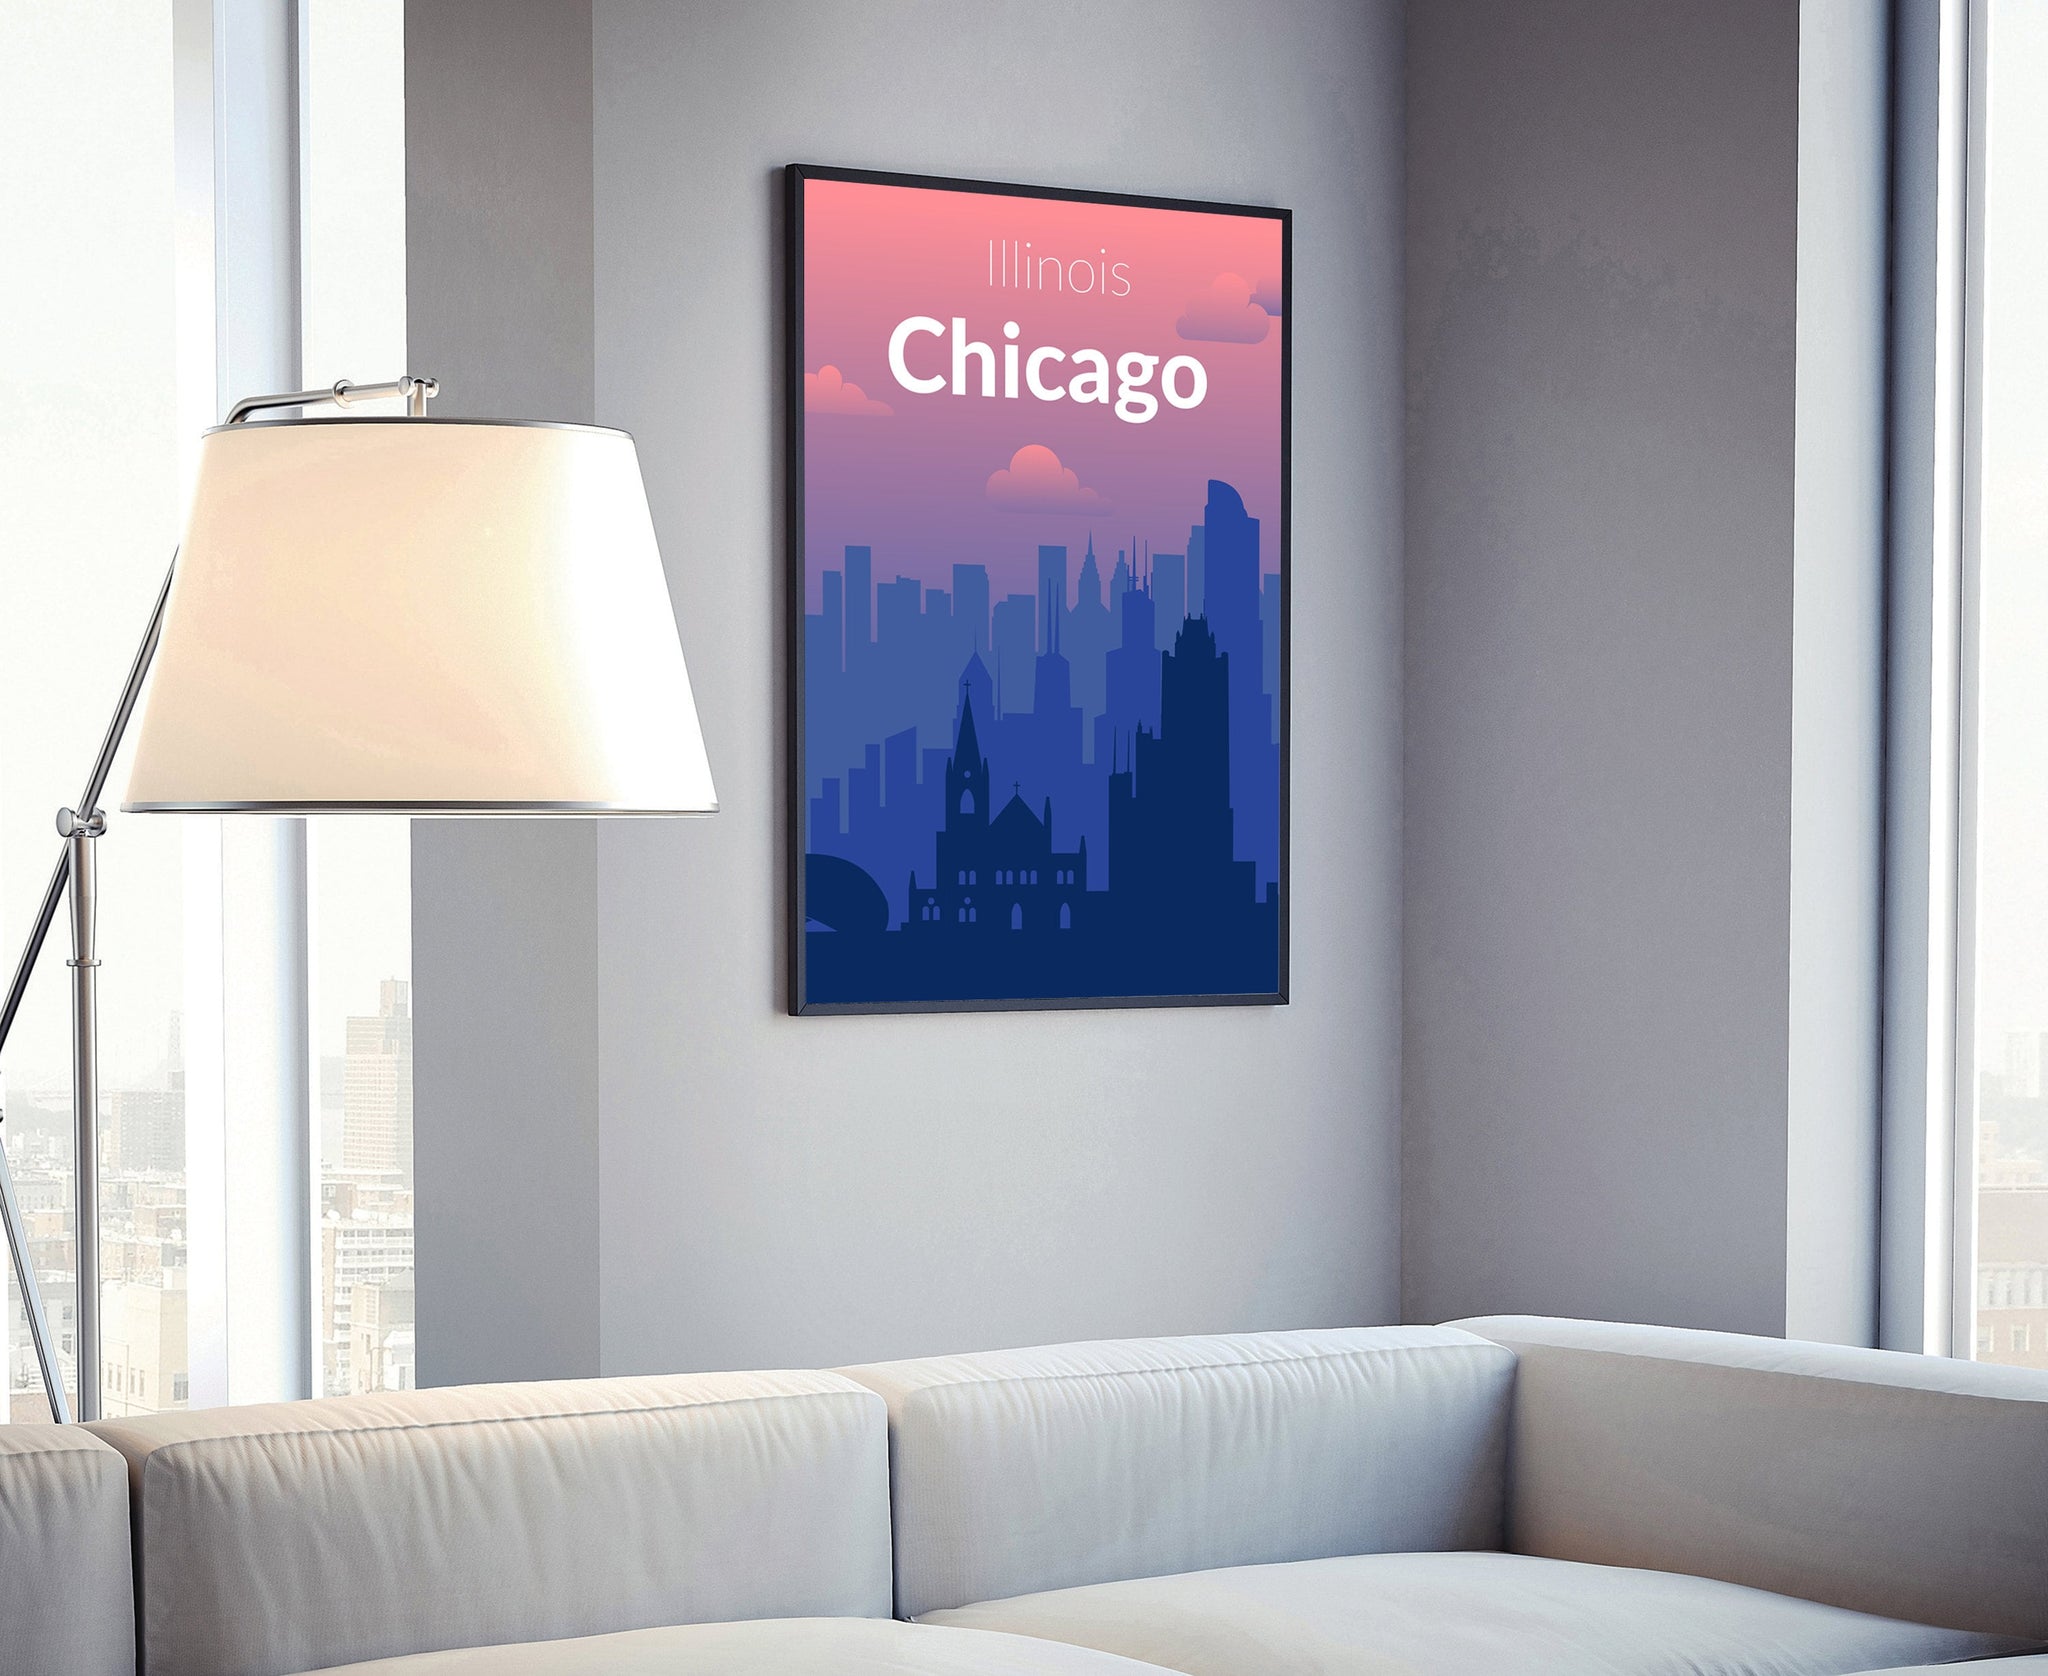 Solid Color US Cities Poster, Illinois Chicago Solid Color Modern Poster Print, Modern State Posters for Office Decorations, Poster for Home